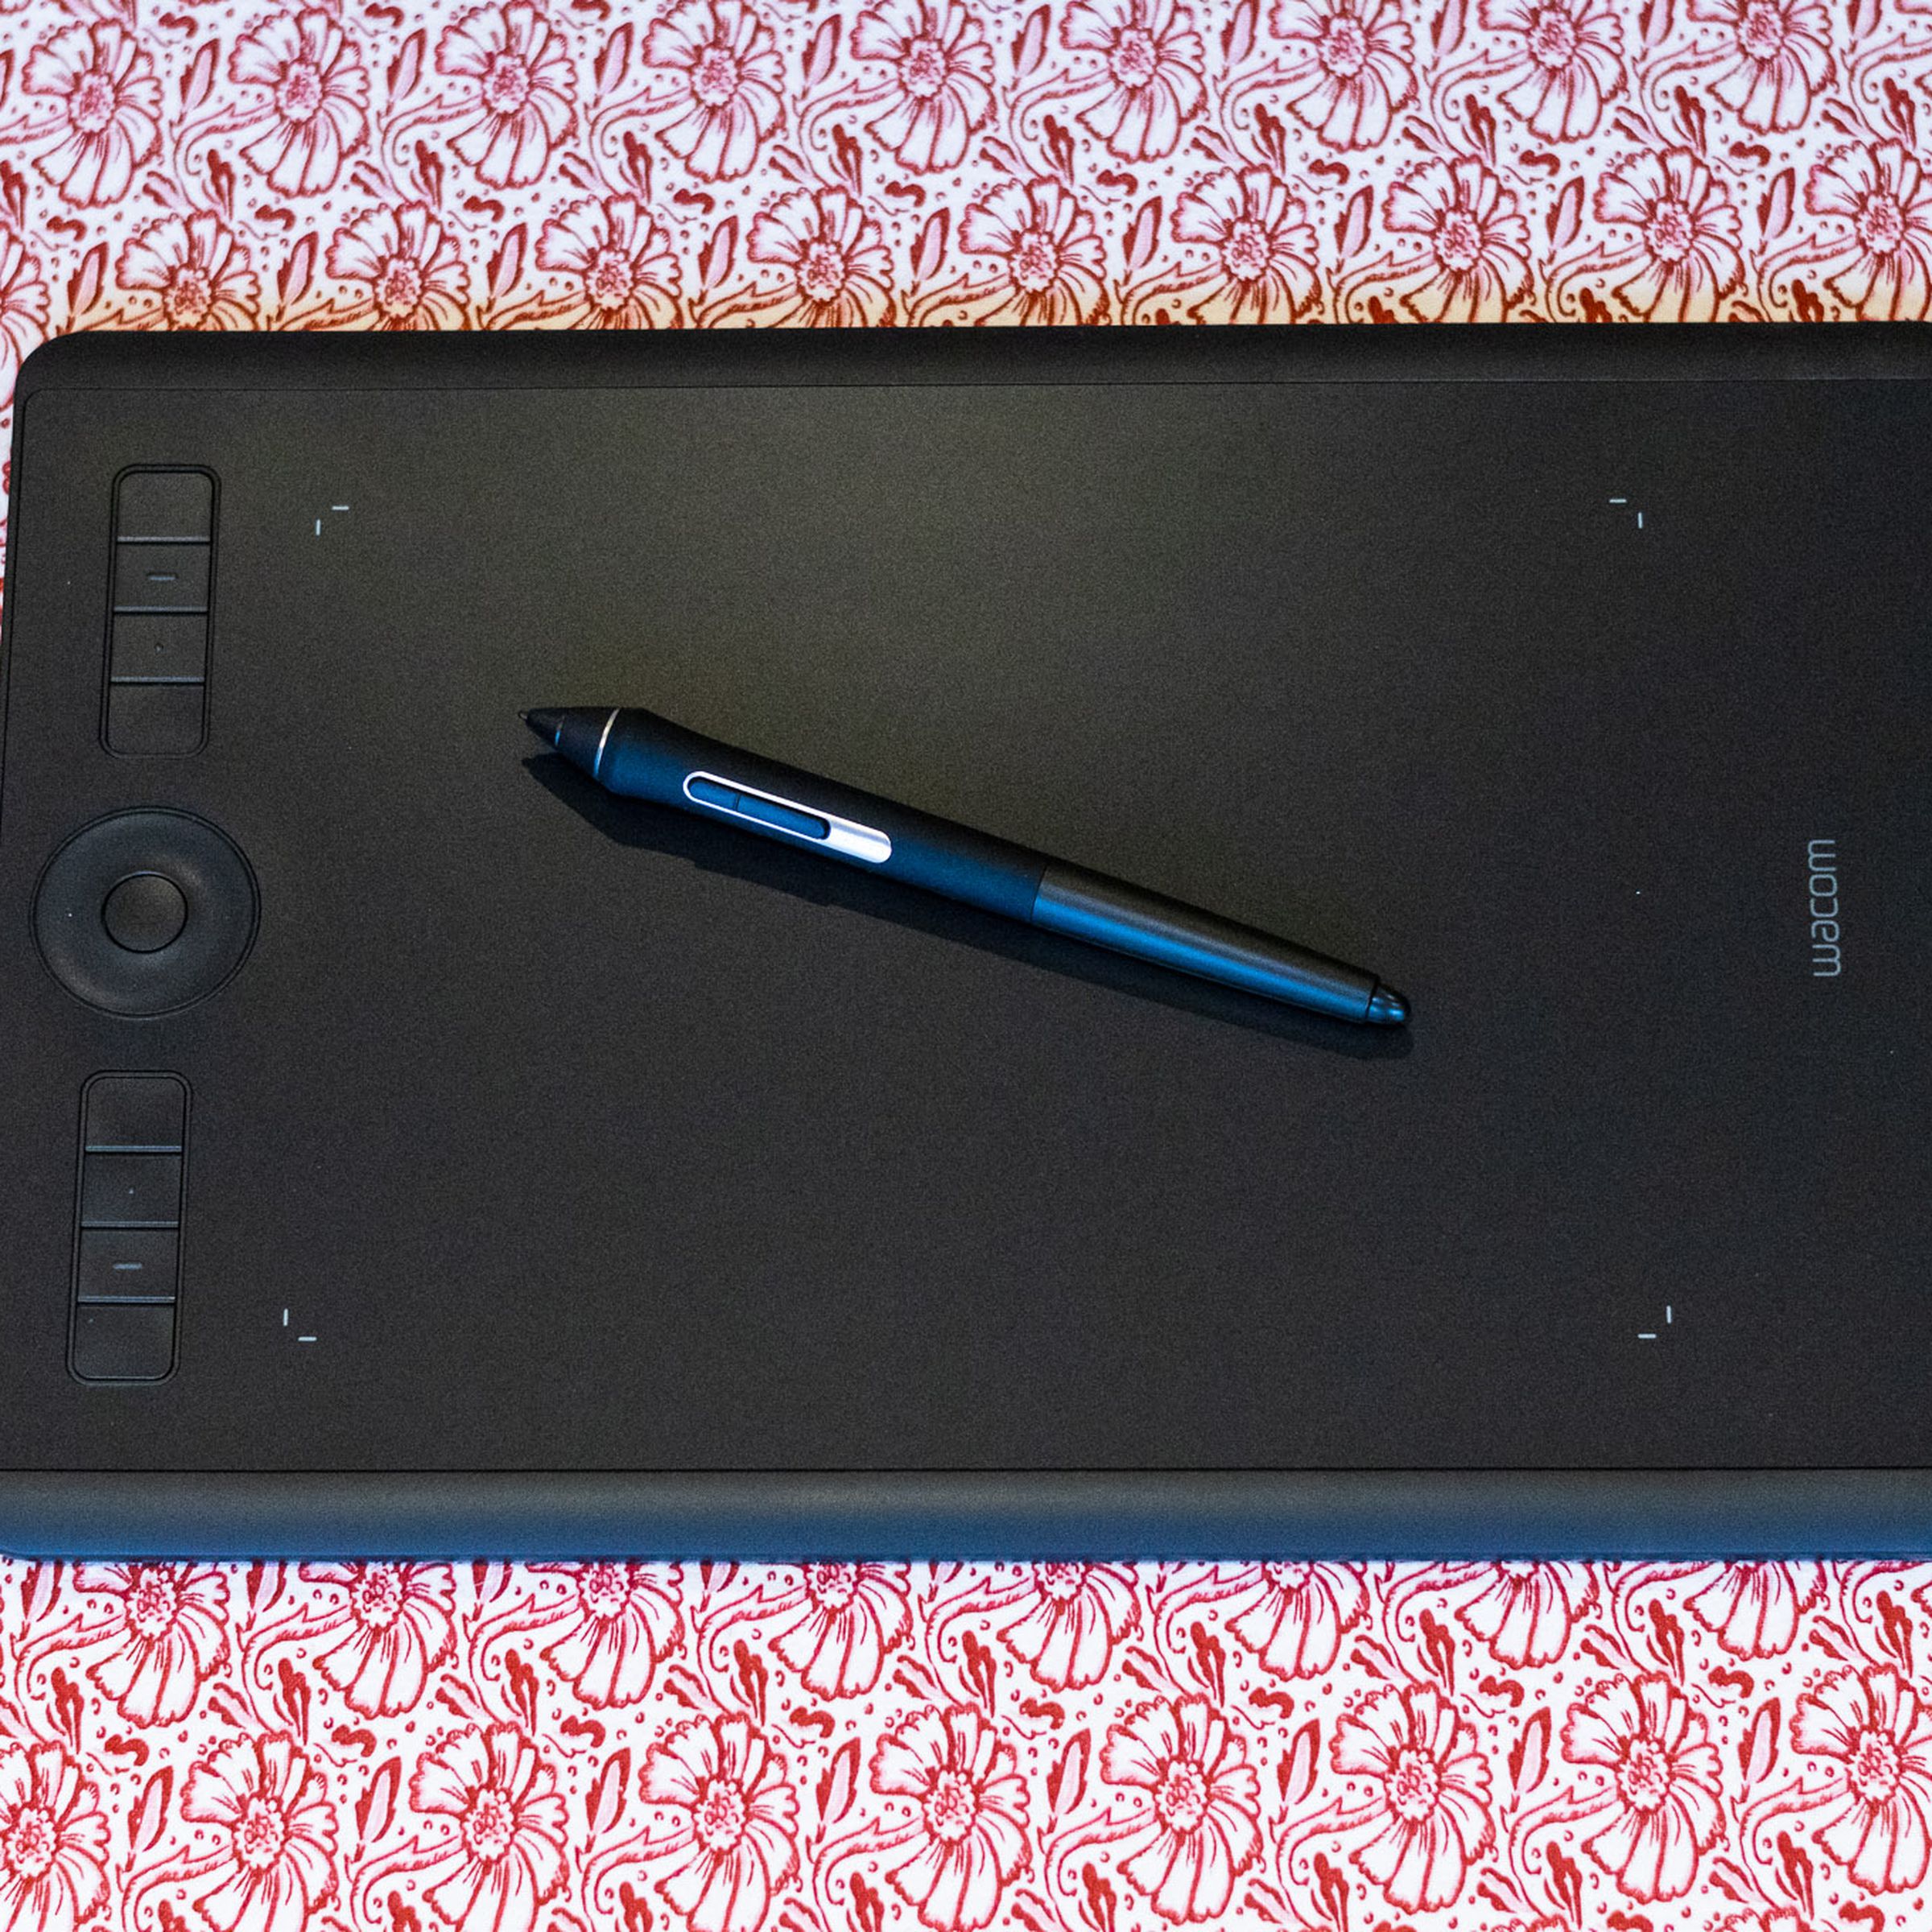 The Wacom Intuos Pro (Medium) resting against a table.